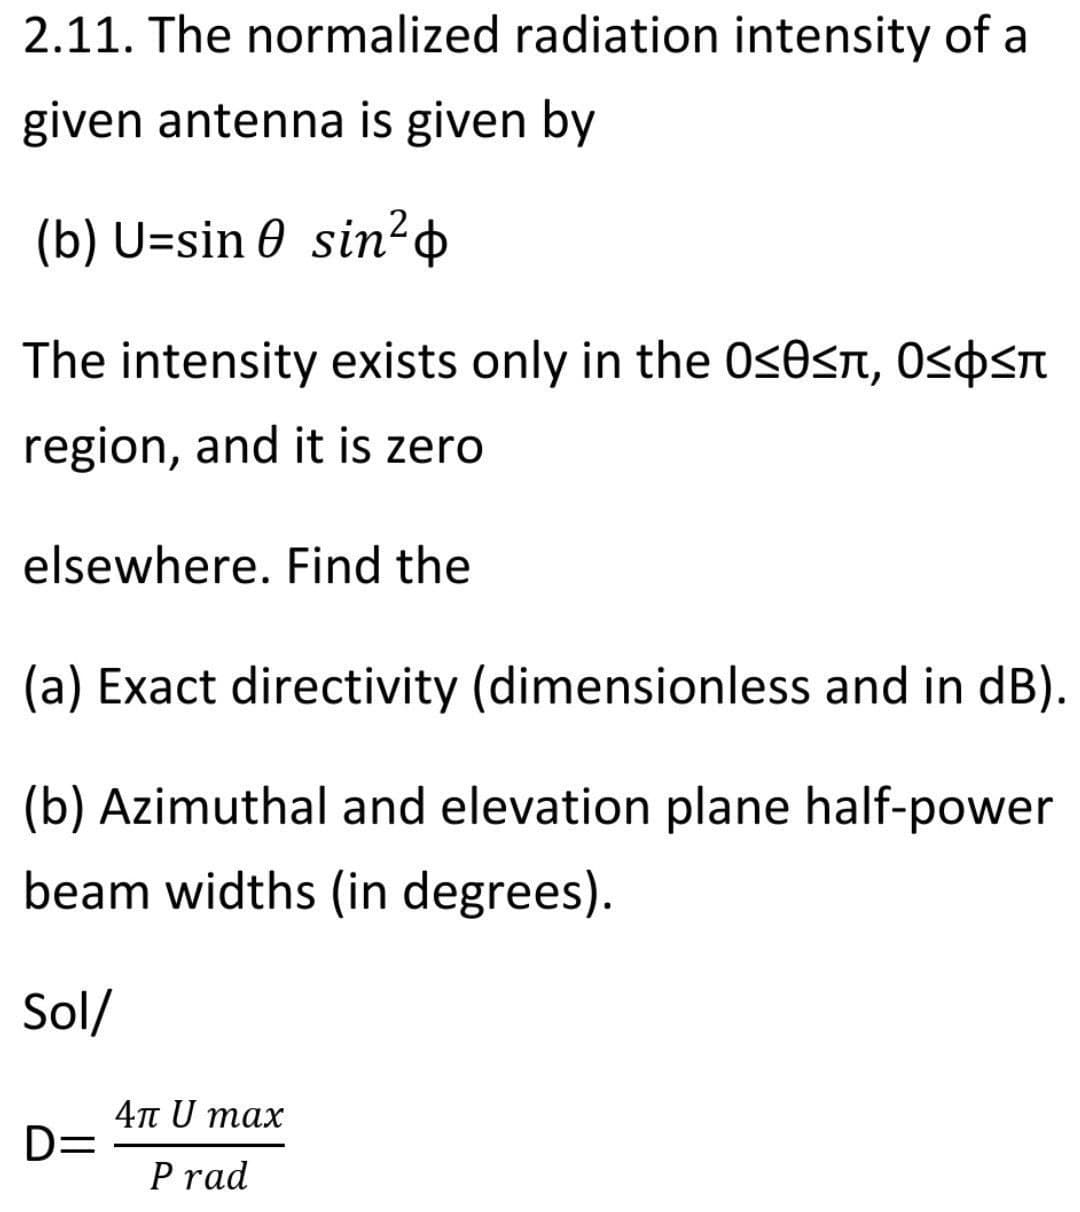 2.11. The normalized radiation intensity of a
given antenna is given by
(b) U=sin 0 sin²+
The intensity exists only in the 0<0<n, Osþsn
region, and it is zero
elsewhere. Find the
(a) Exact directivity (dimensionless and in dB).
(b) Azimuthal and elevation plane half-power
beam widths (in degrees).
Sol/
4п U тах
D=
P rad
